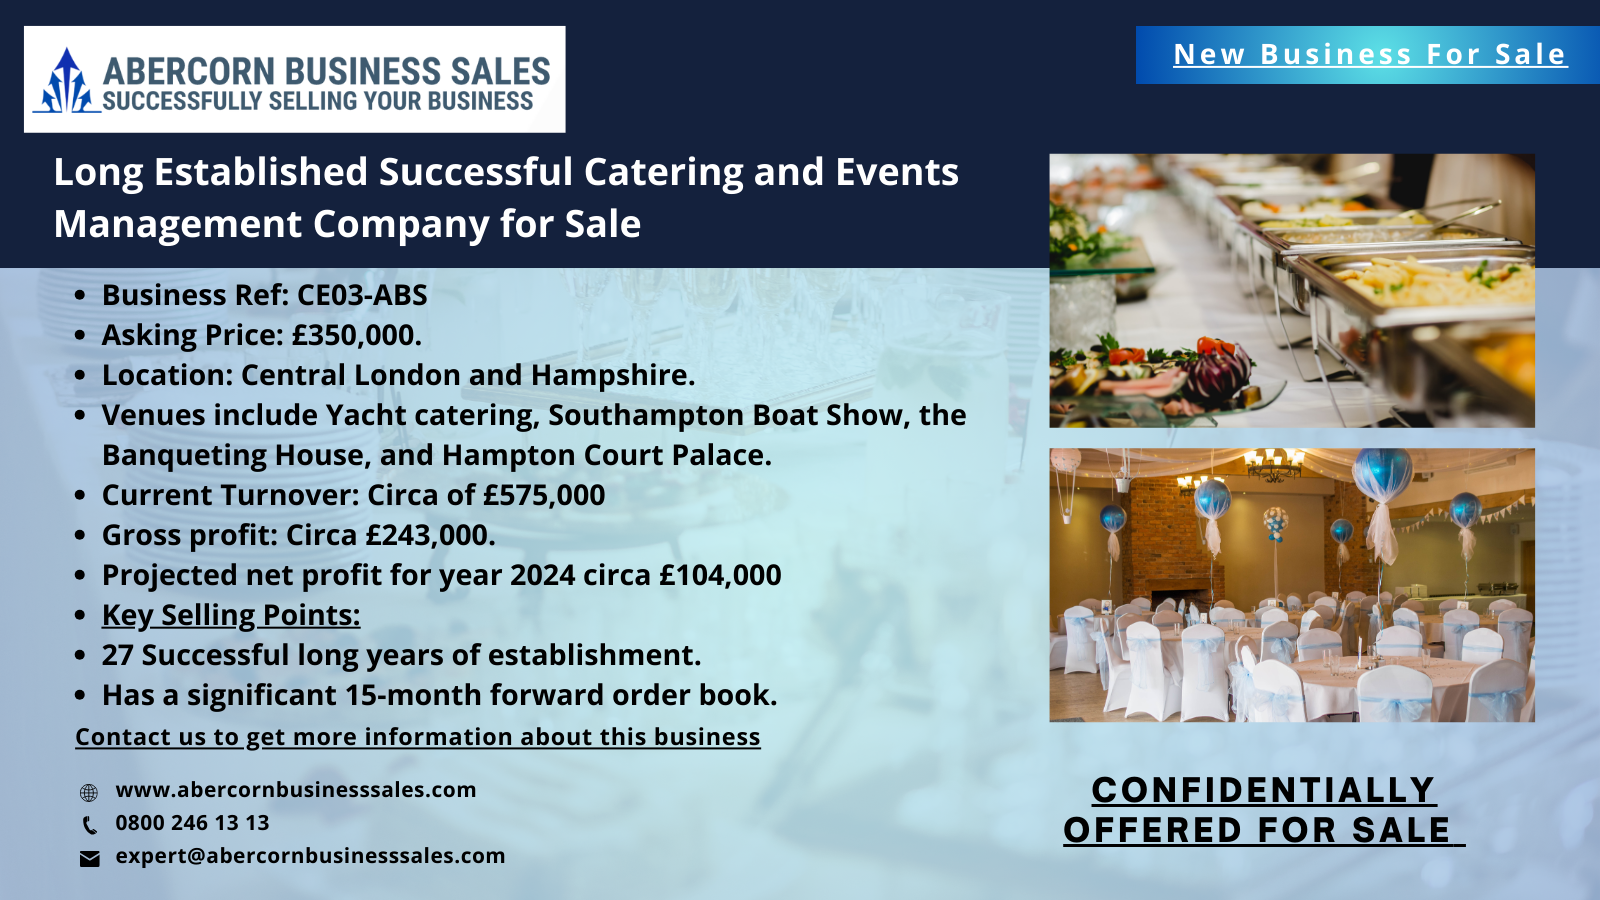 CE03-ABS - Long Established Successful Catering and Events Management Company for Sale